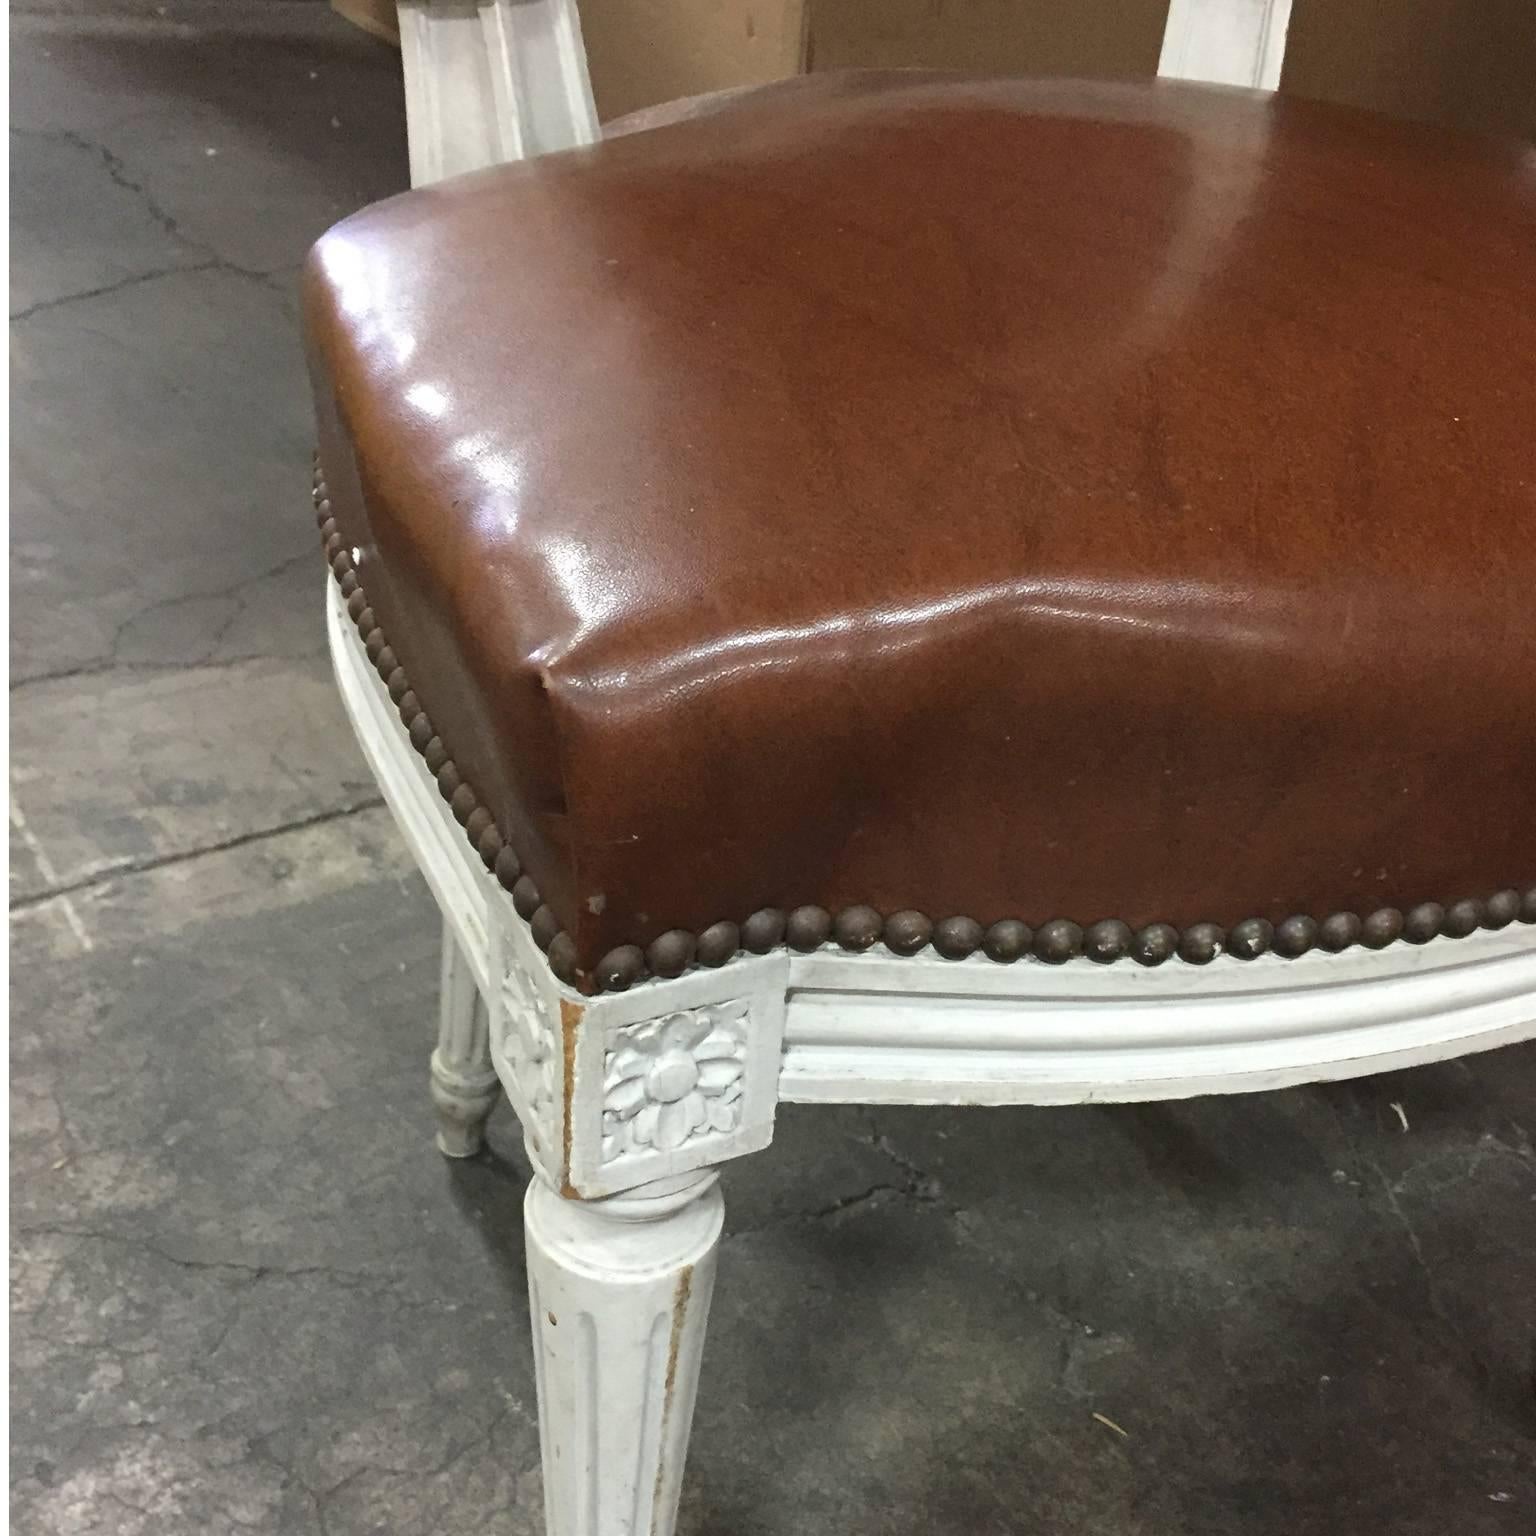 An absolutely stunning set in excellent condition throughout. Originally finished in an off-white, with some wear consistent with age. A gorgeous patina. Leather has been taken care of very well. Leather upholstered on seat and back of chair as seen